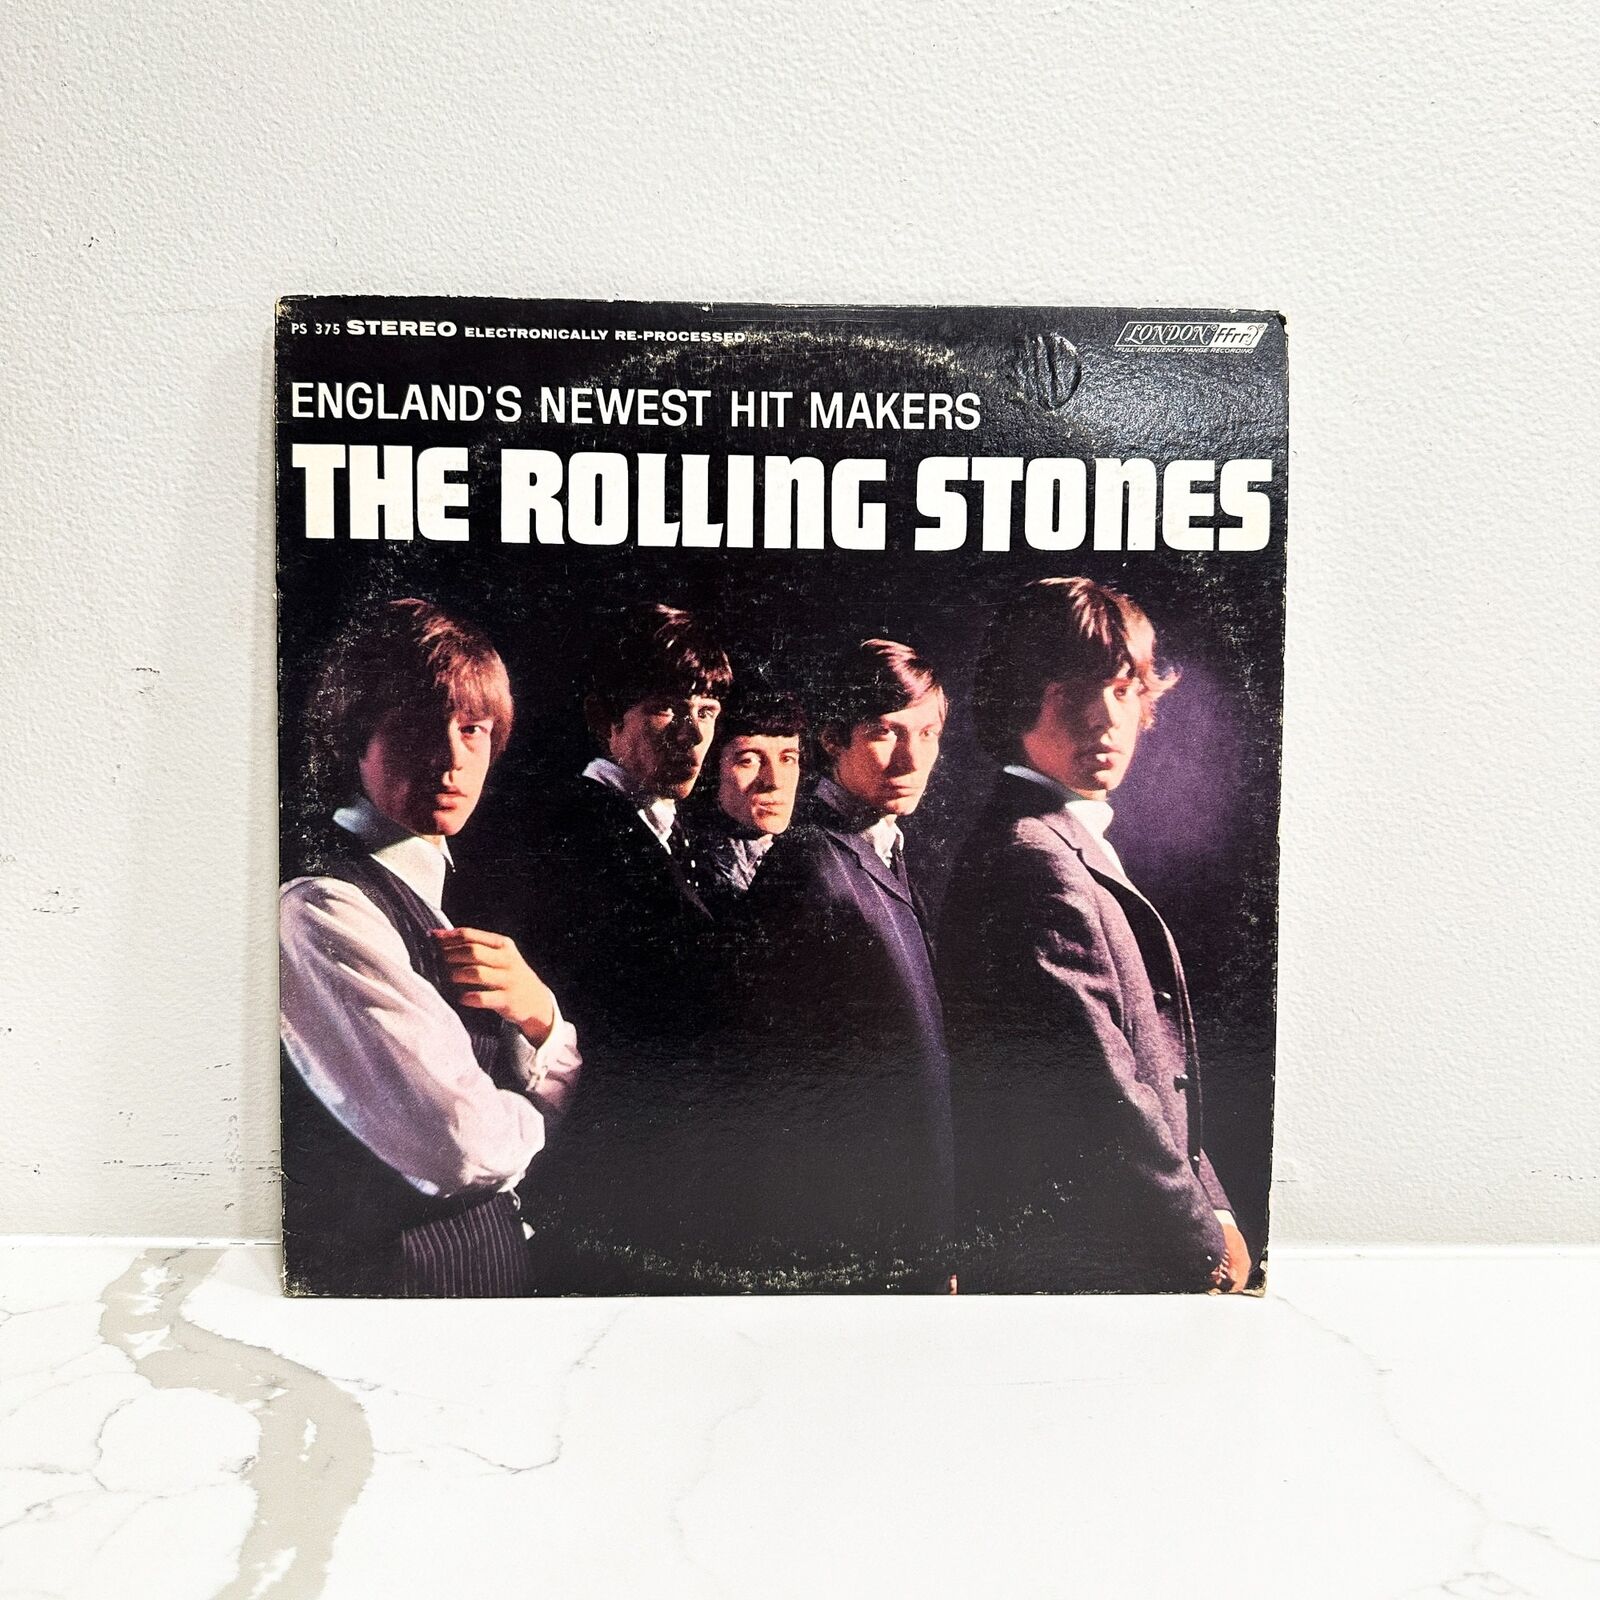 The Rolling Stones – England's Newest Hit Makers - Vinyl LP Record - 1964